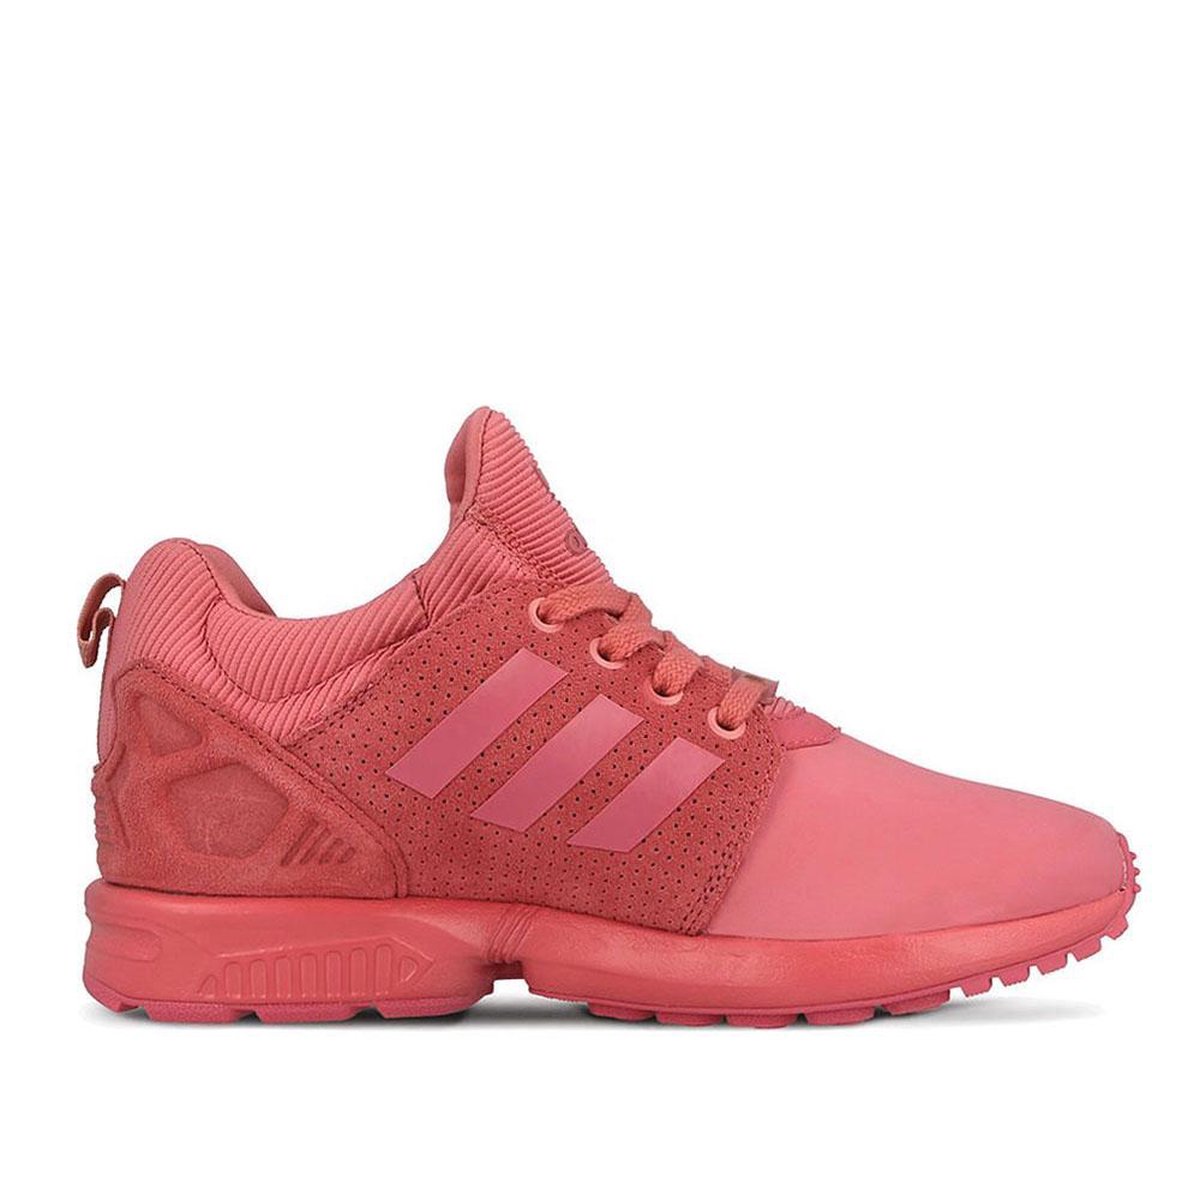 Adidas Zx Flux 2.0 Dames Roze Clearance 100%, 42% OFF | fames.org.br